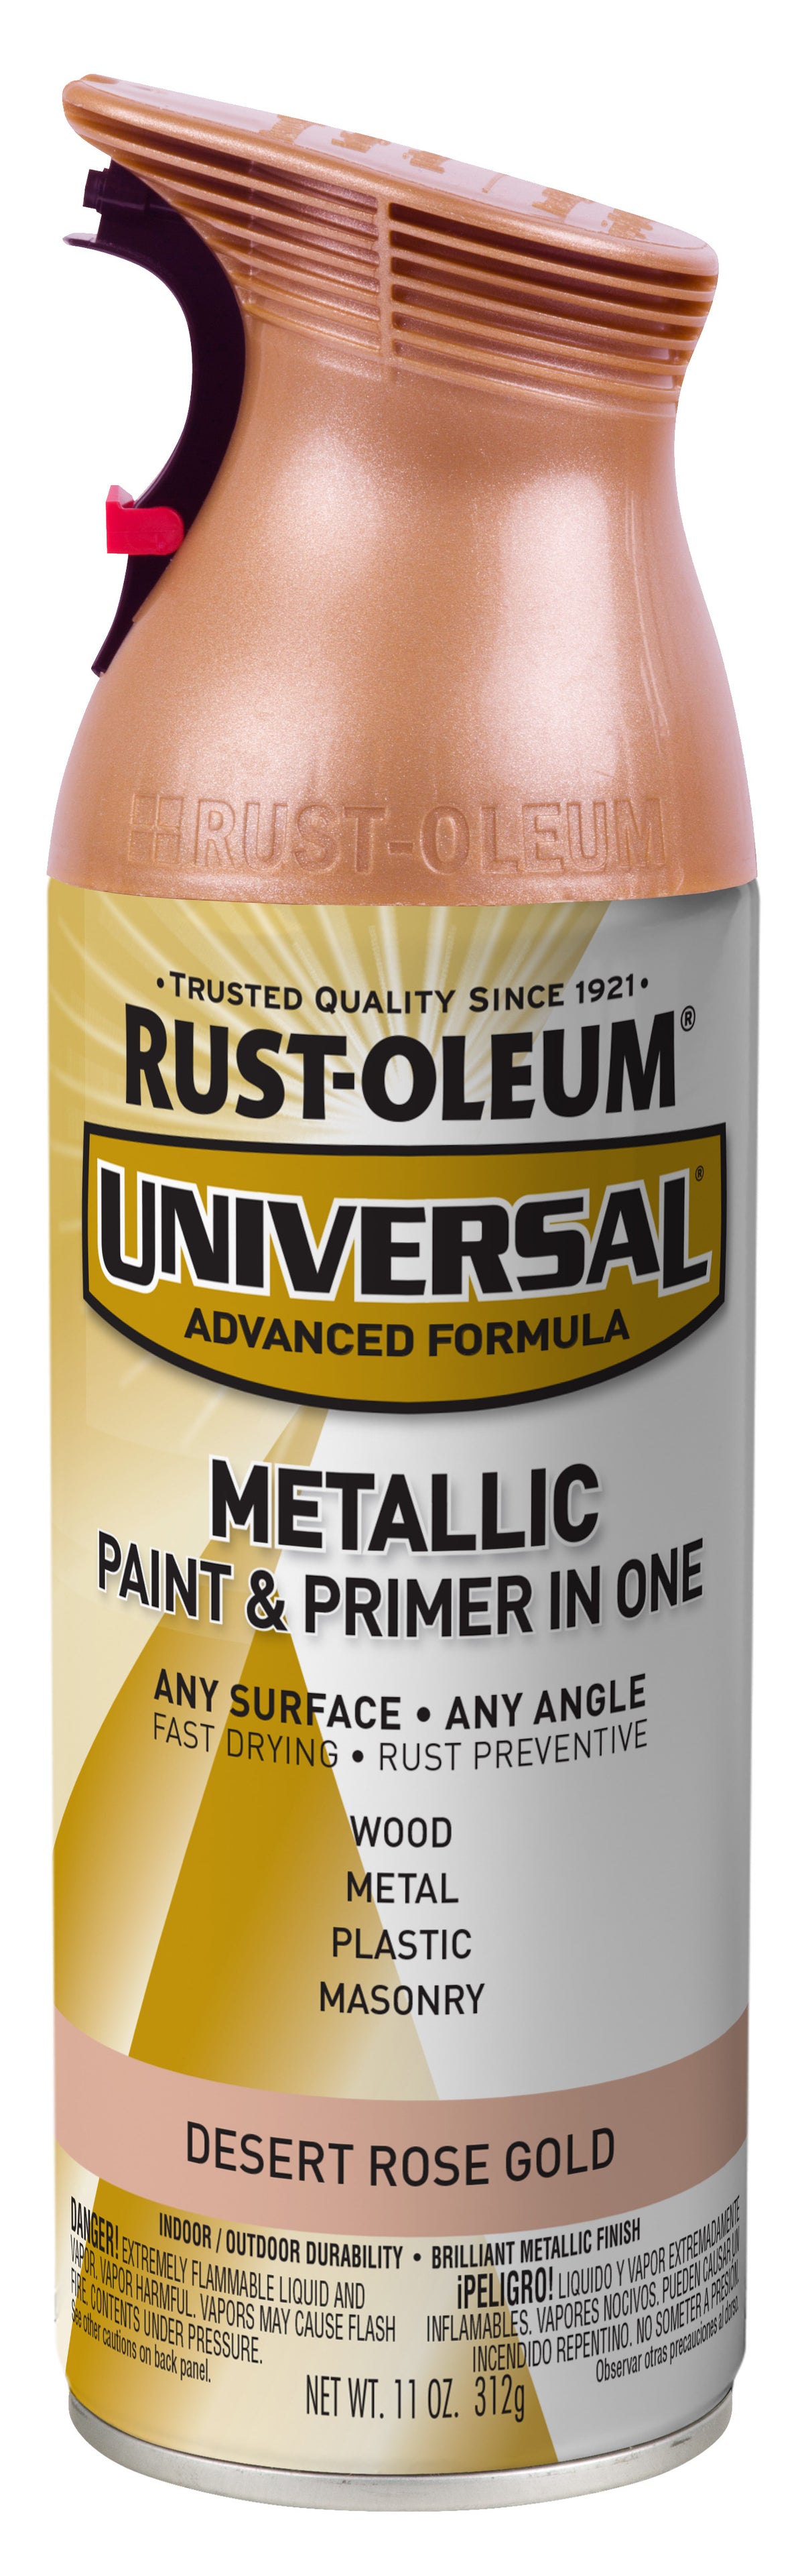 Rose Gold Spray Paint  Spray paint colors, Gold spray paint, Rose